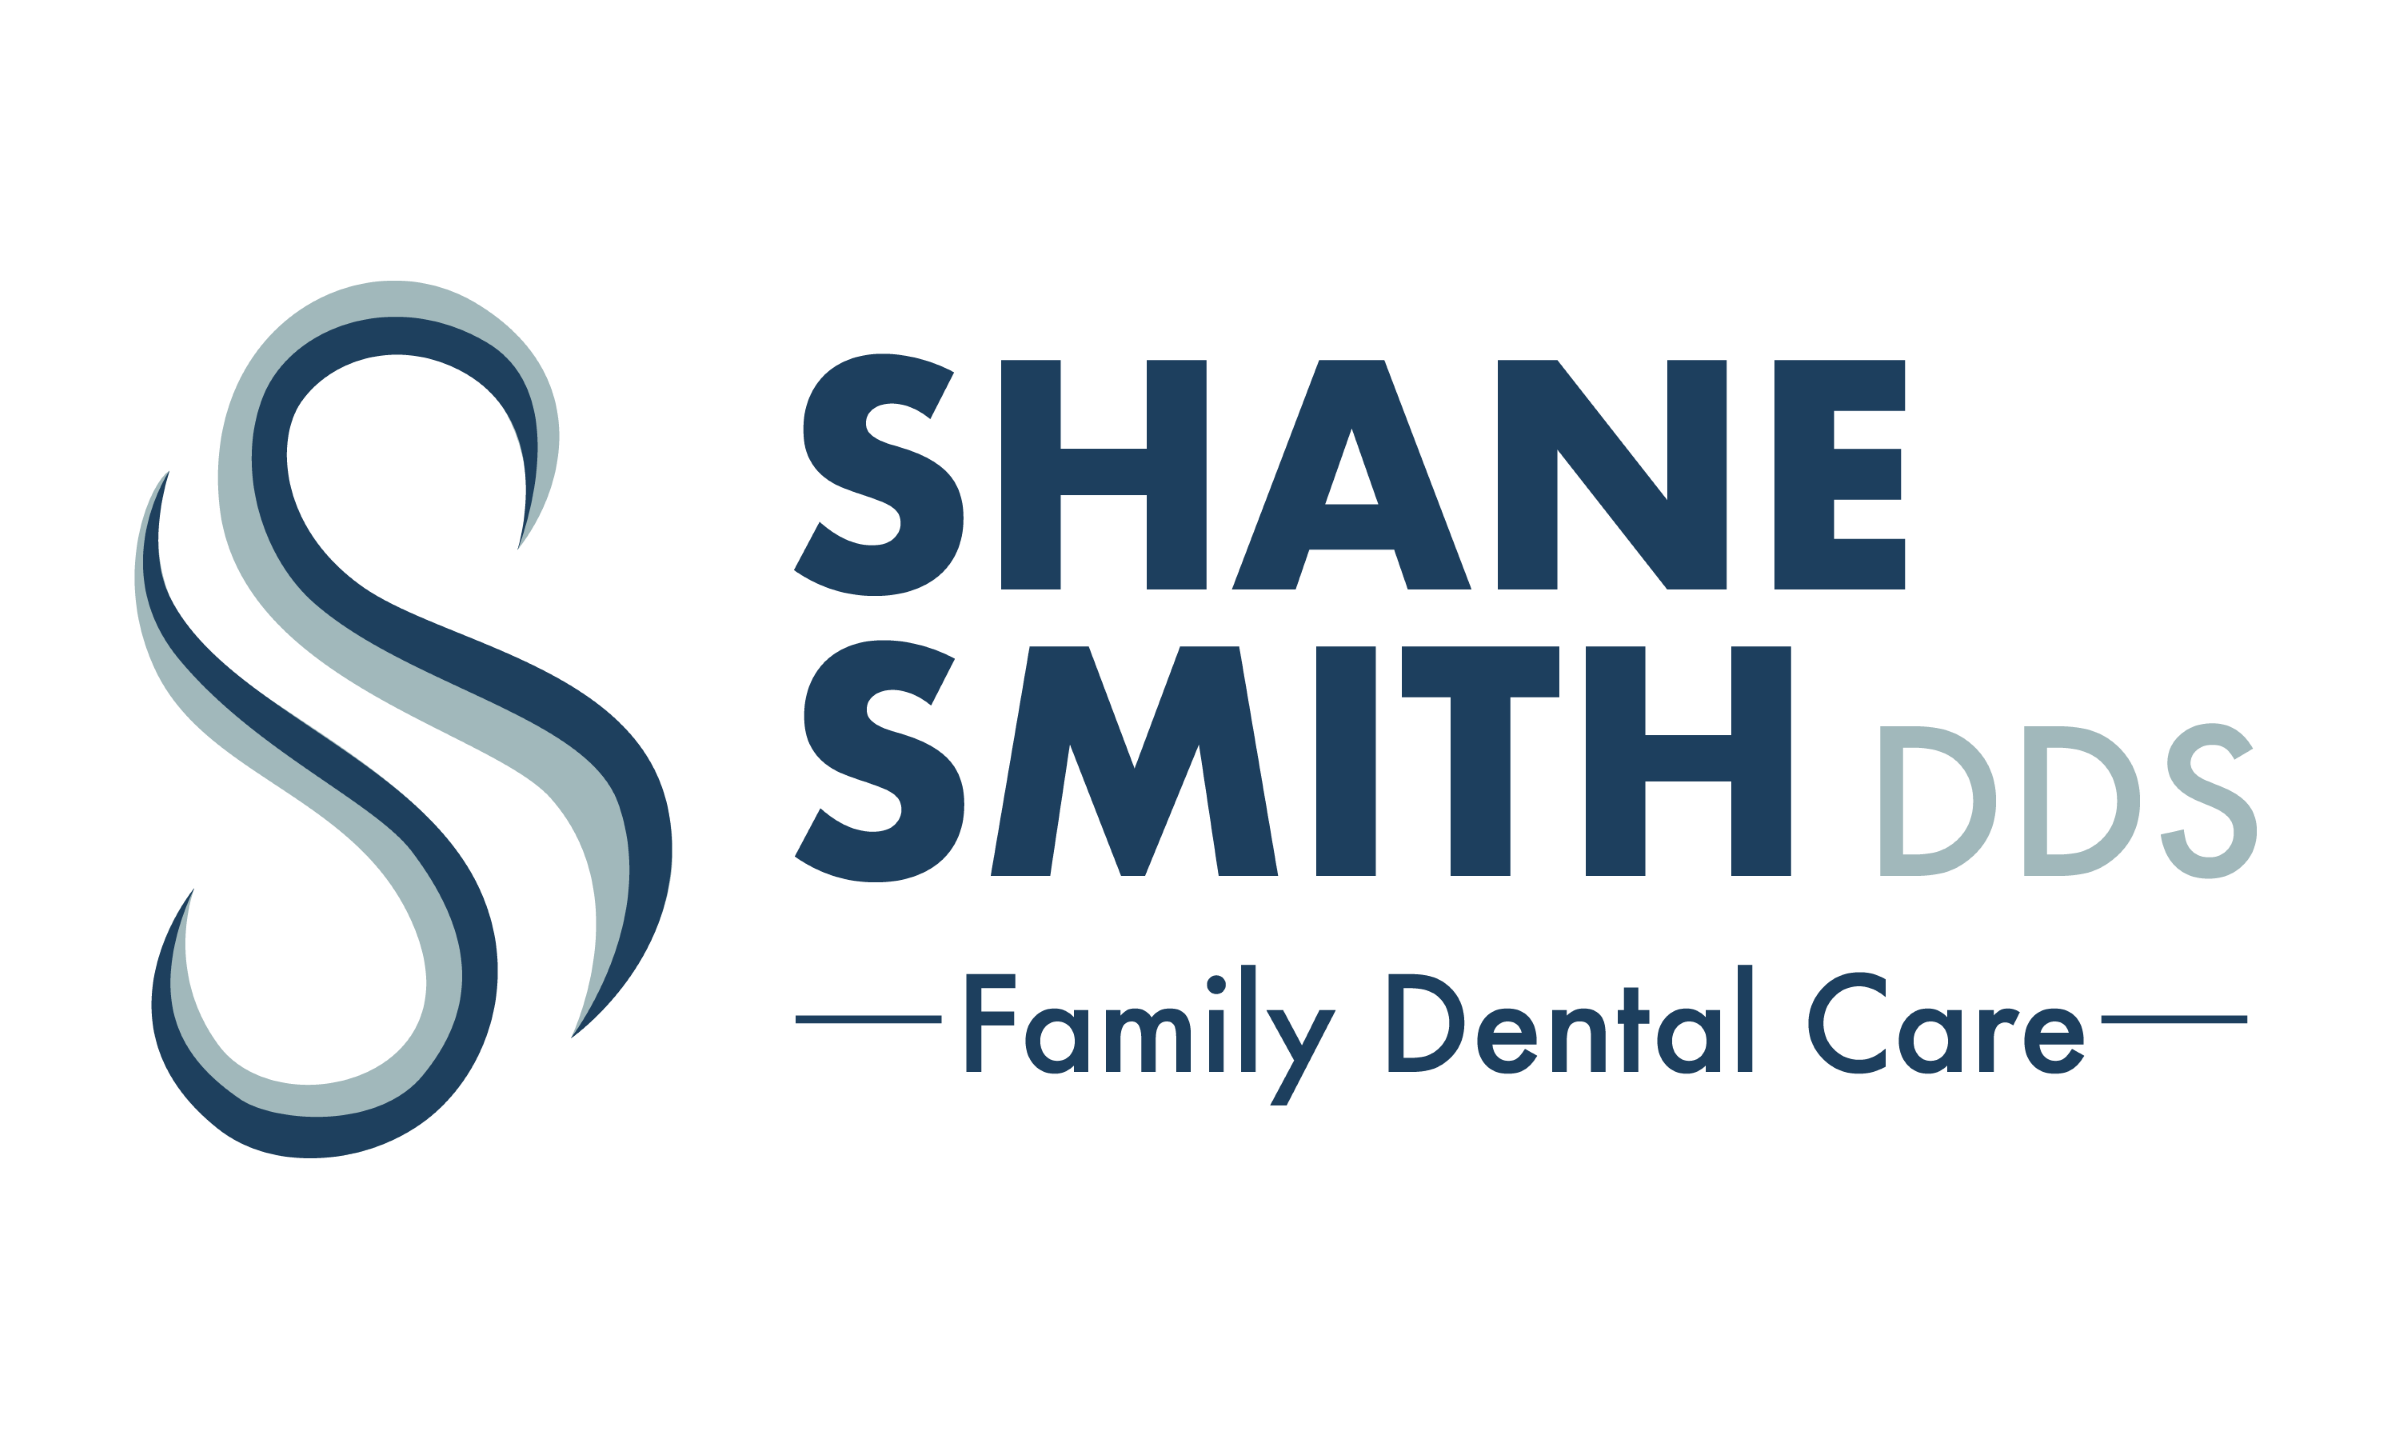 Business logo of Shane Smith DDS